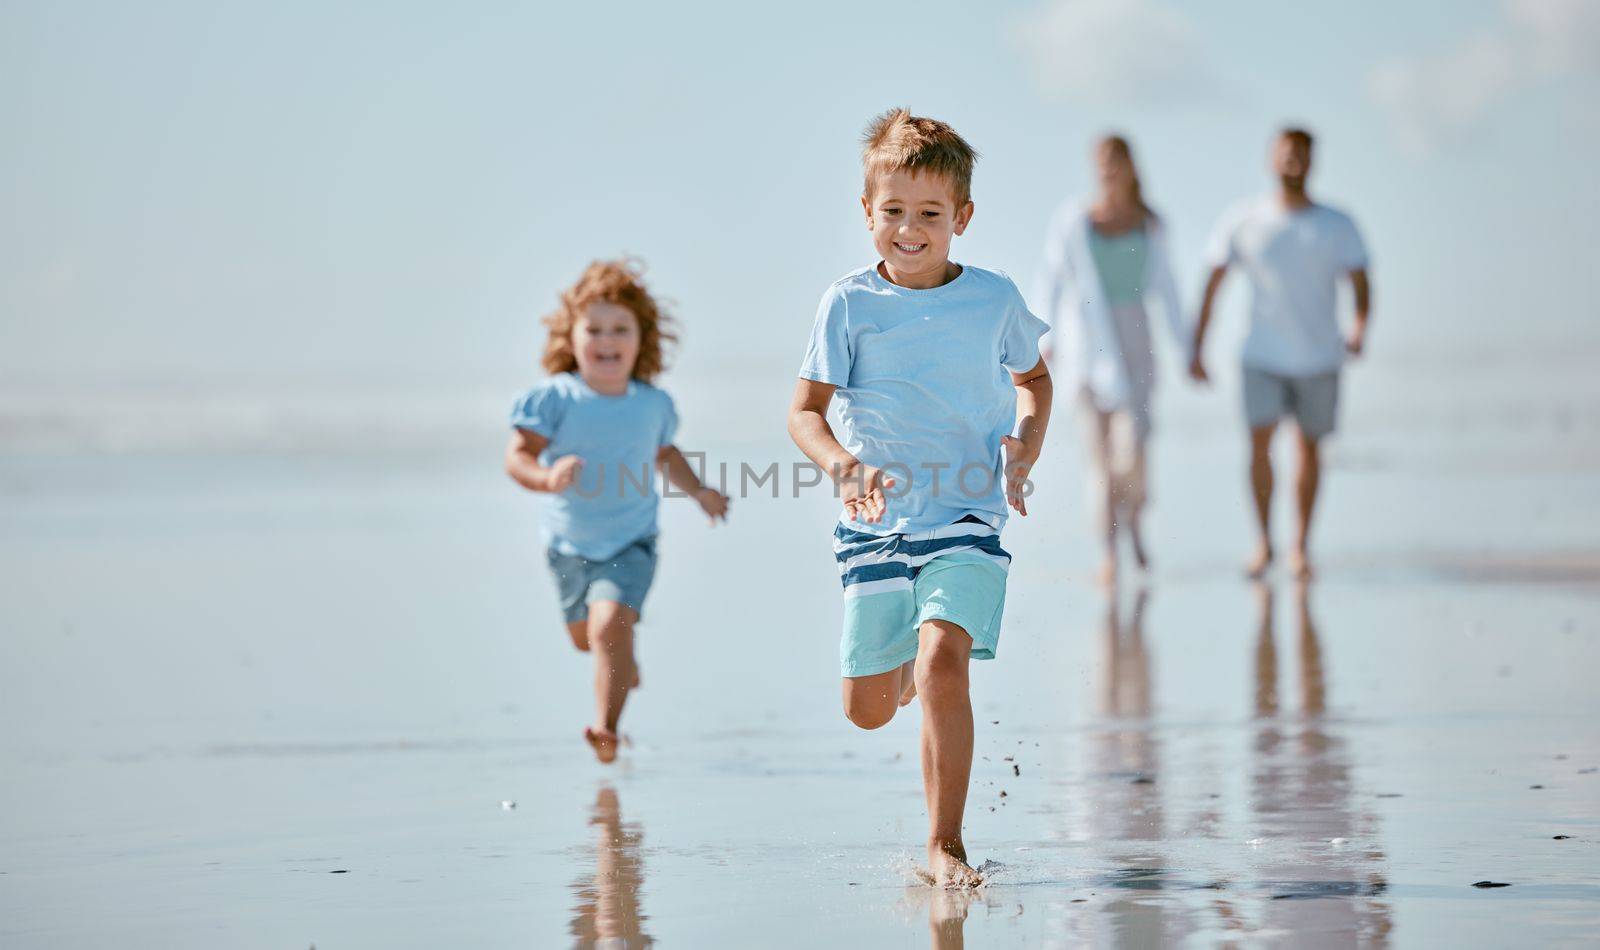 Children, running and beach with a brother and sister together on the sand by the sea or ocean during summer. Family, travel and fun with sibling kids on the coast with their parents for holiday.